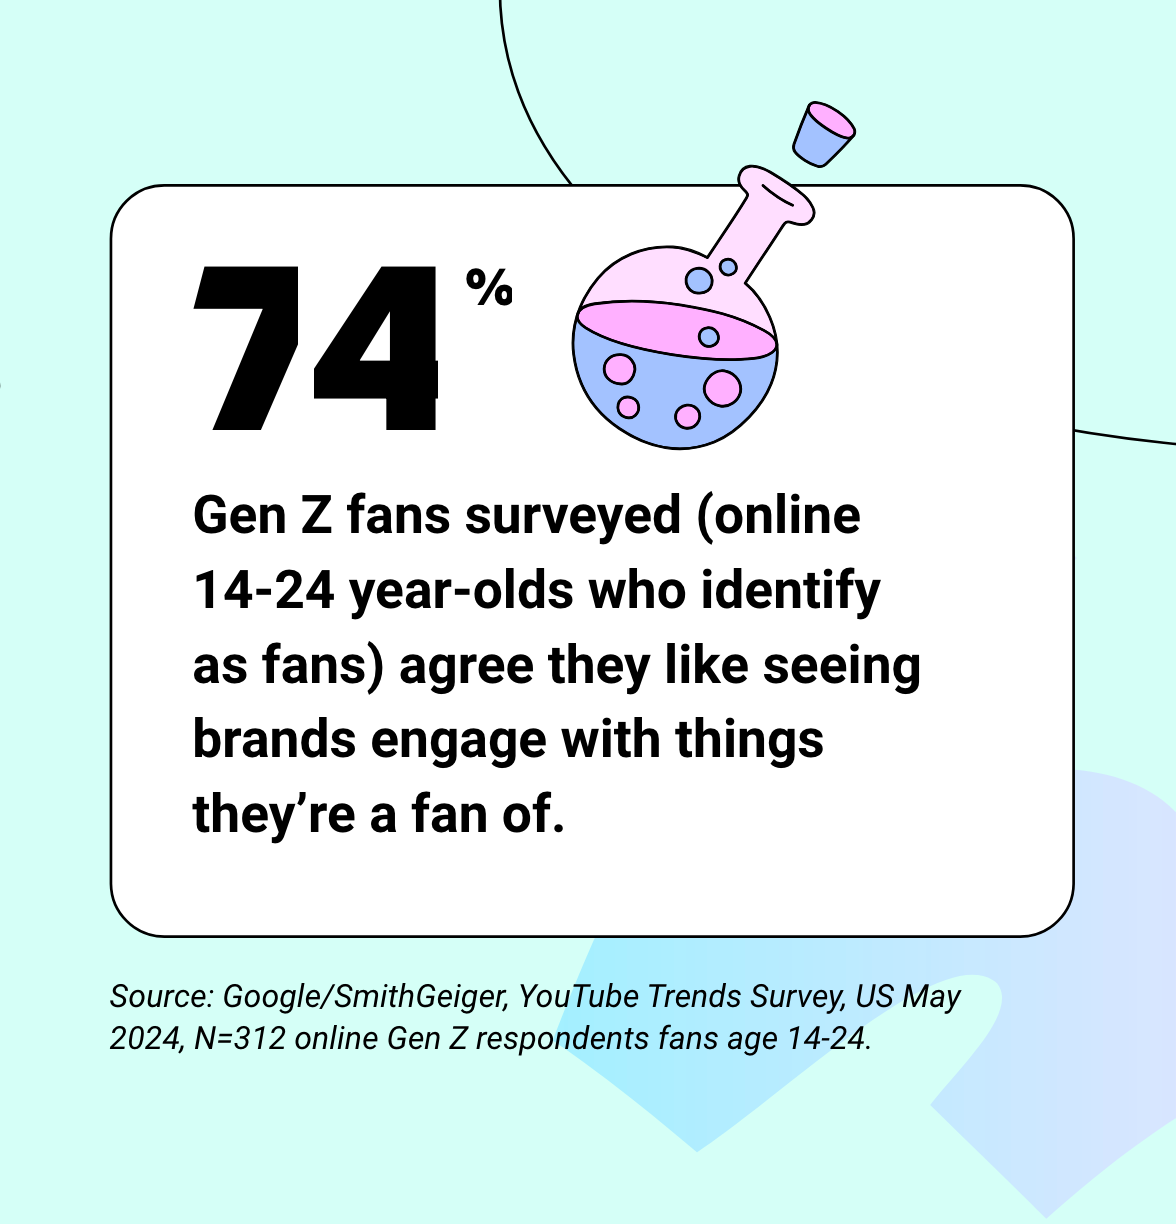 Graphic from YouTube trend report: 74% Gen Z fans surveyed (online 14-24 year-olds who identify as fans) agree they like seeing brands engage with things they’re a fan of